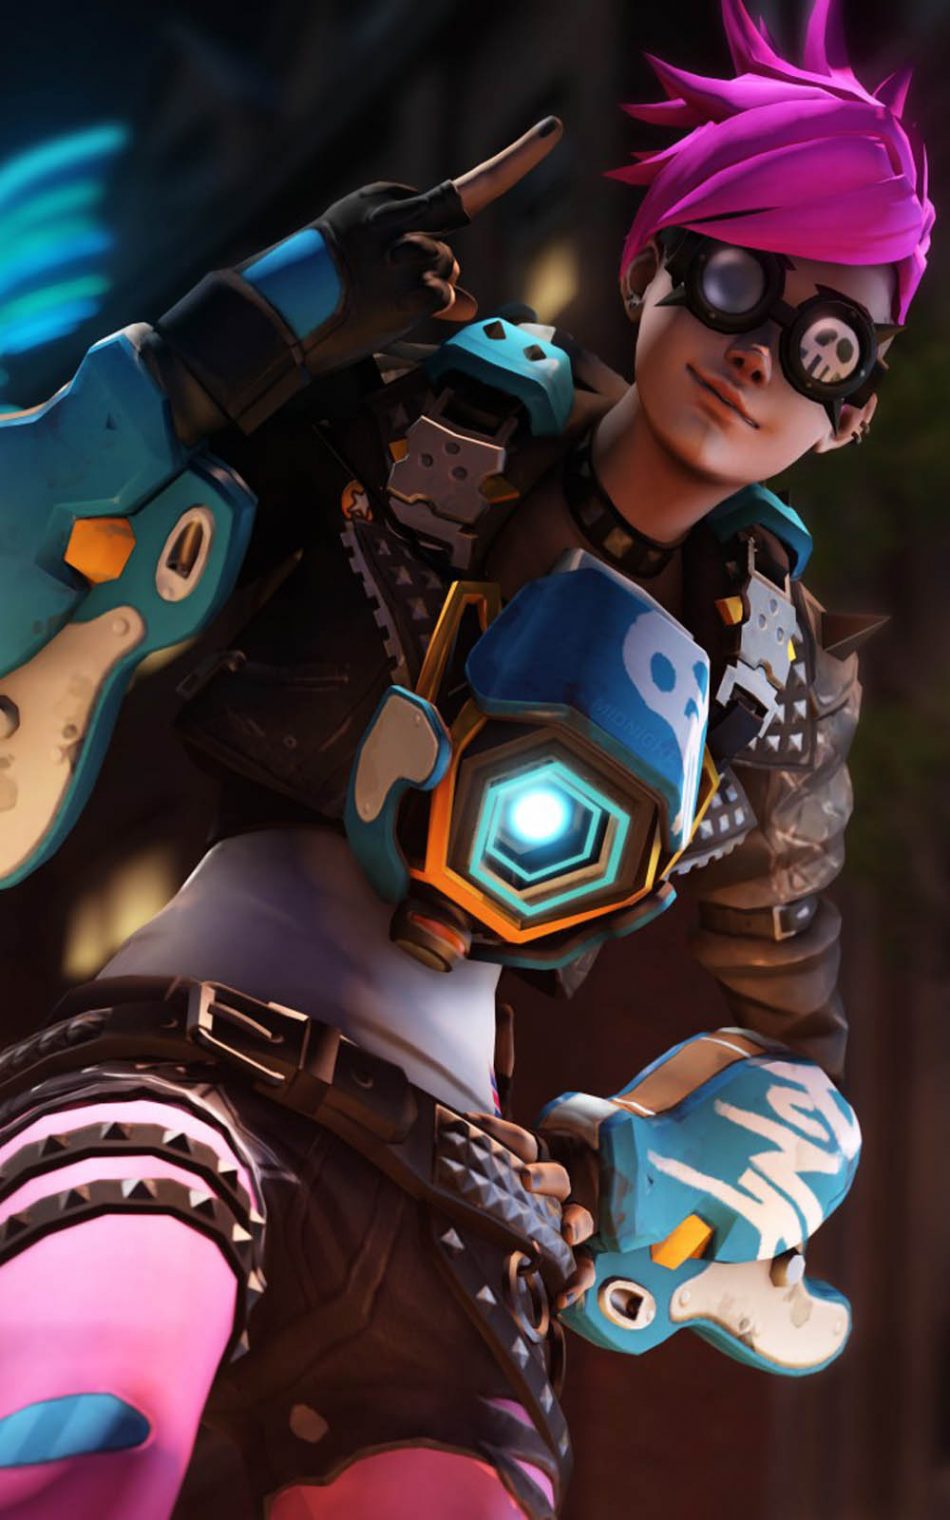 Punk Tracer Overwatch Hd Mobile Wallpaper - Overwatch Tracer Wallpaper Mobile - HD Wallpaper 